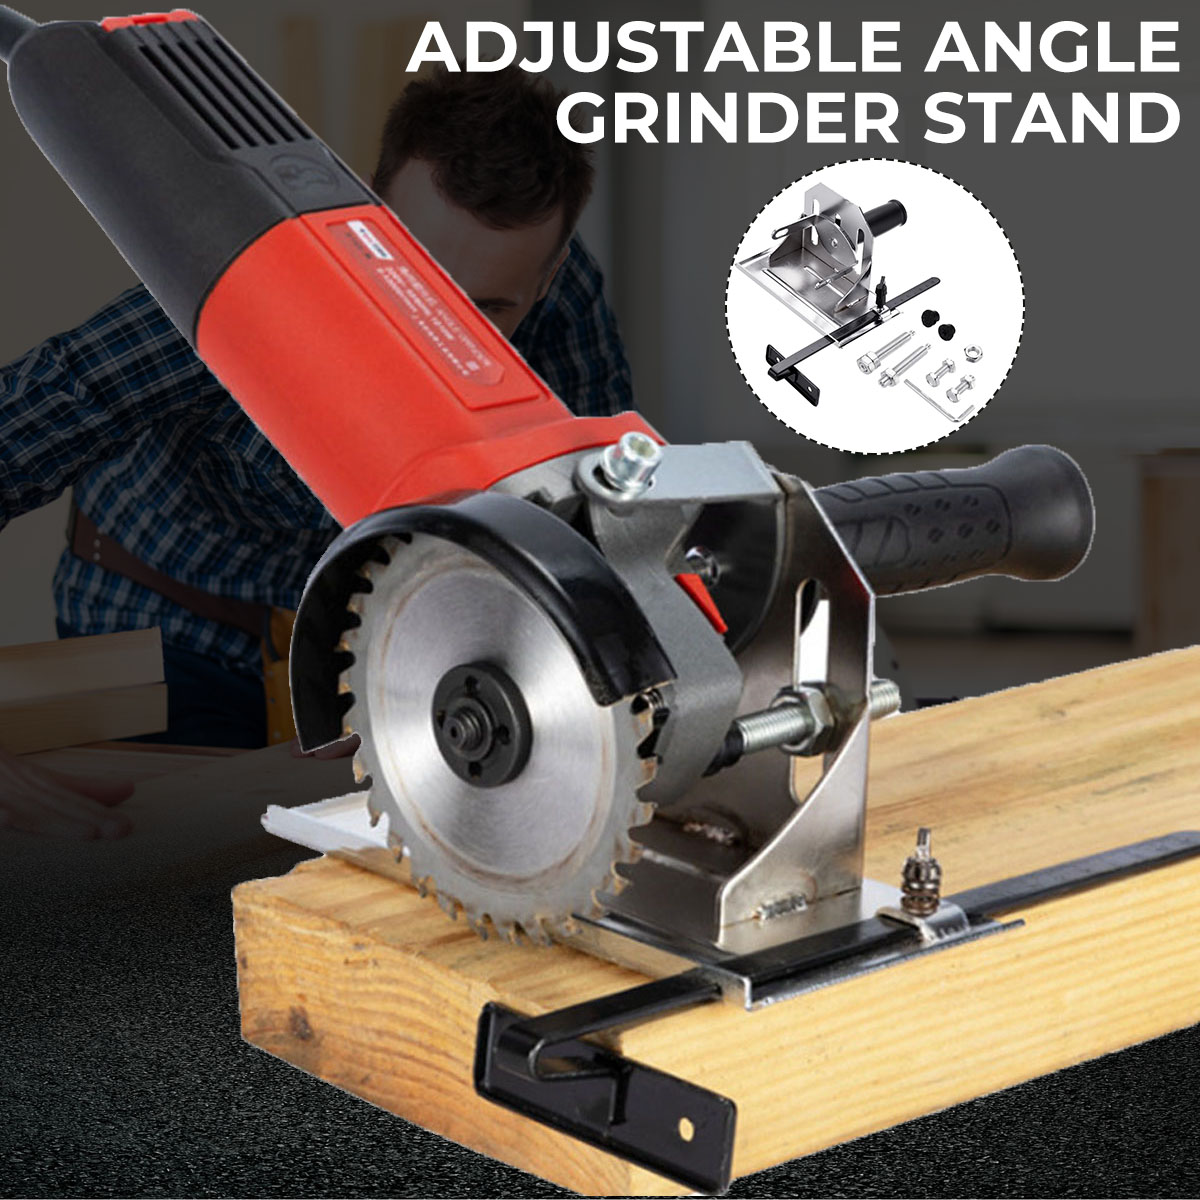 Drillpro-Multifunction-Angle-Grinder-Stand-Angle-Cutting-Bracket-with-Adjustable-Base-Plate-Cover-1775086-1